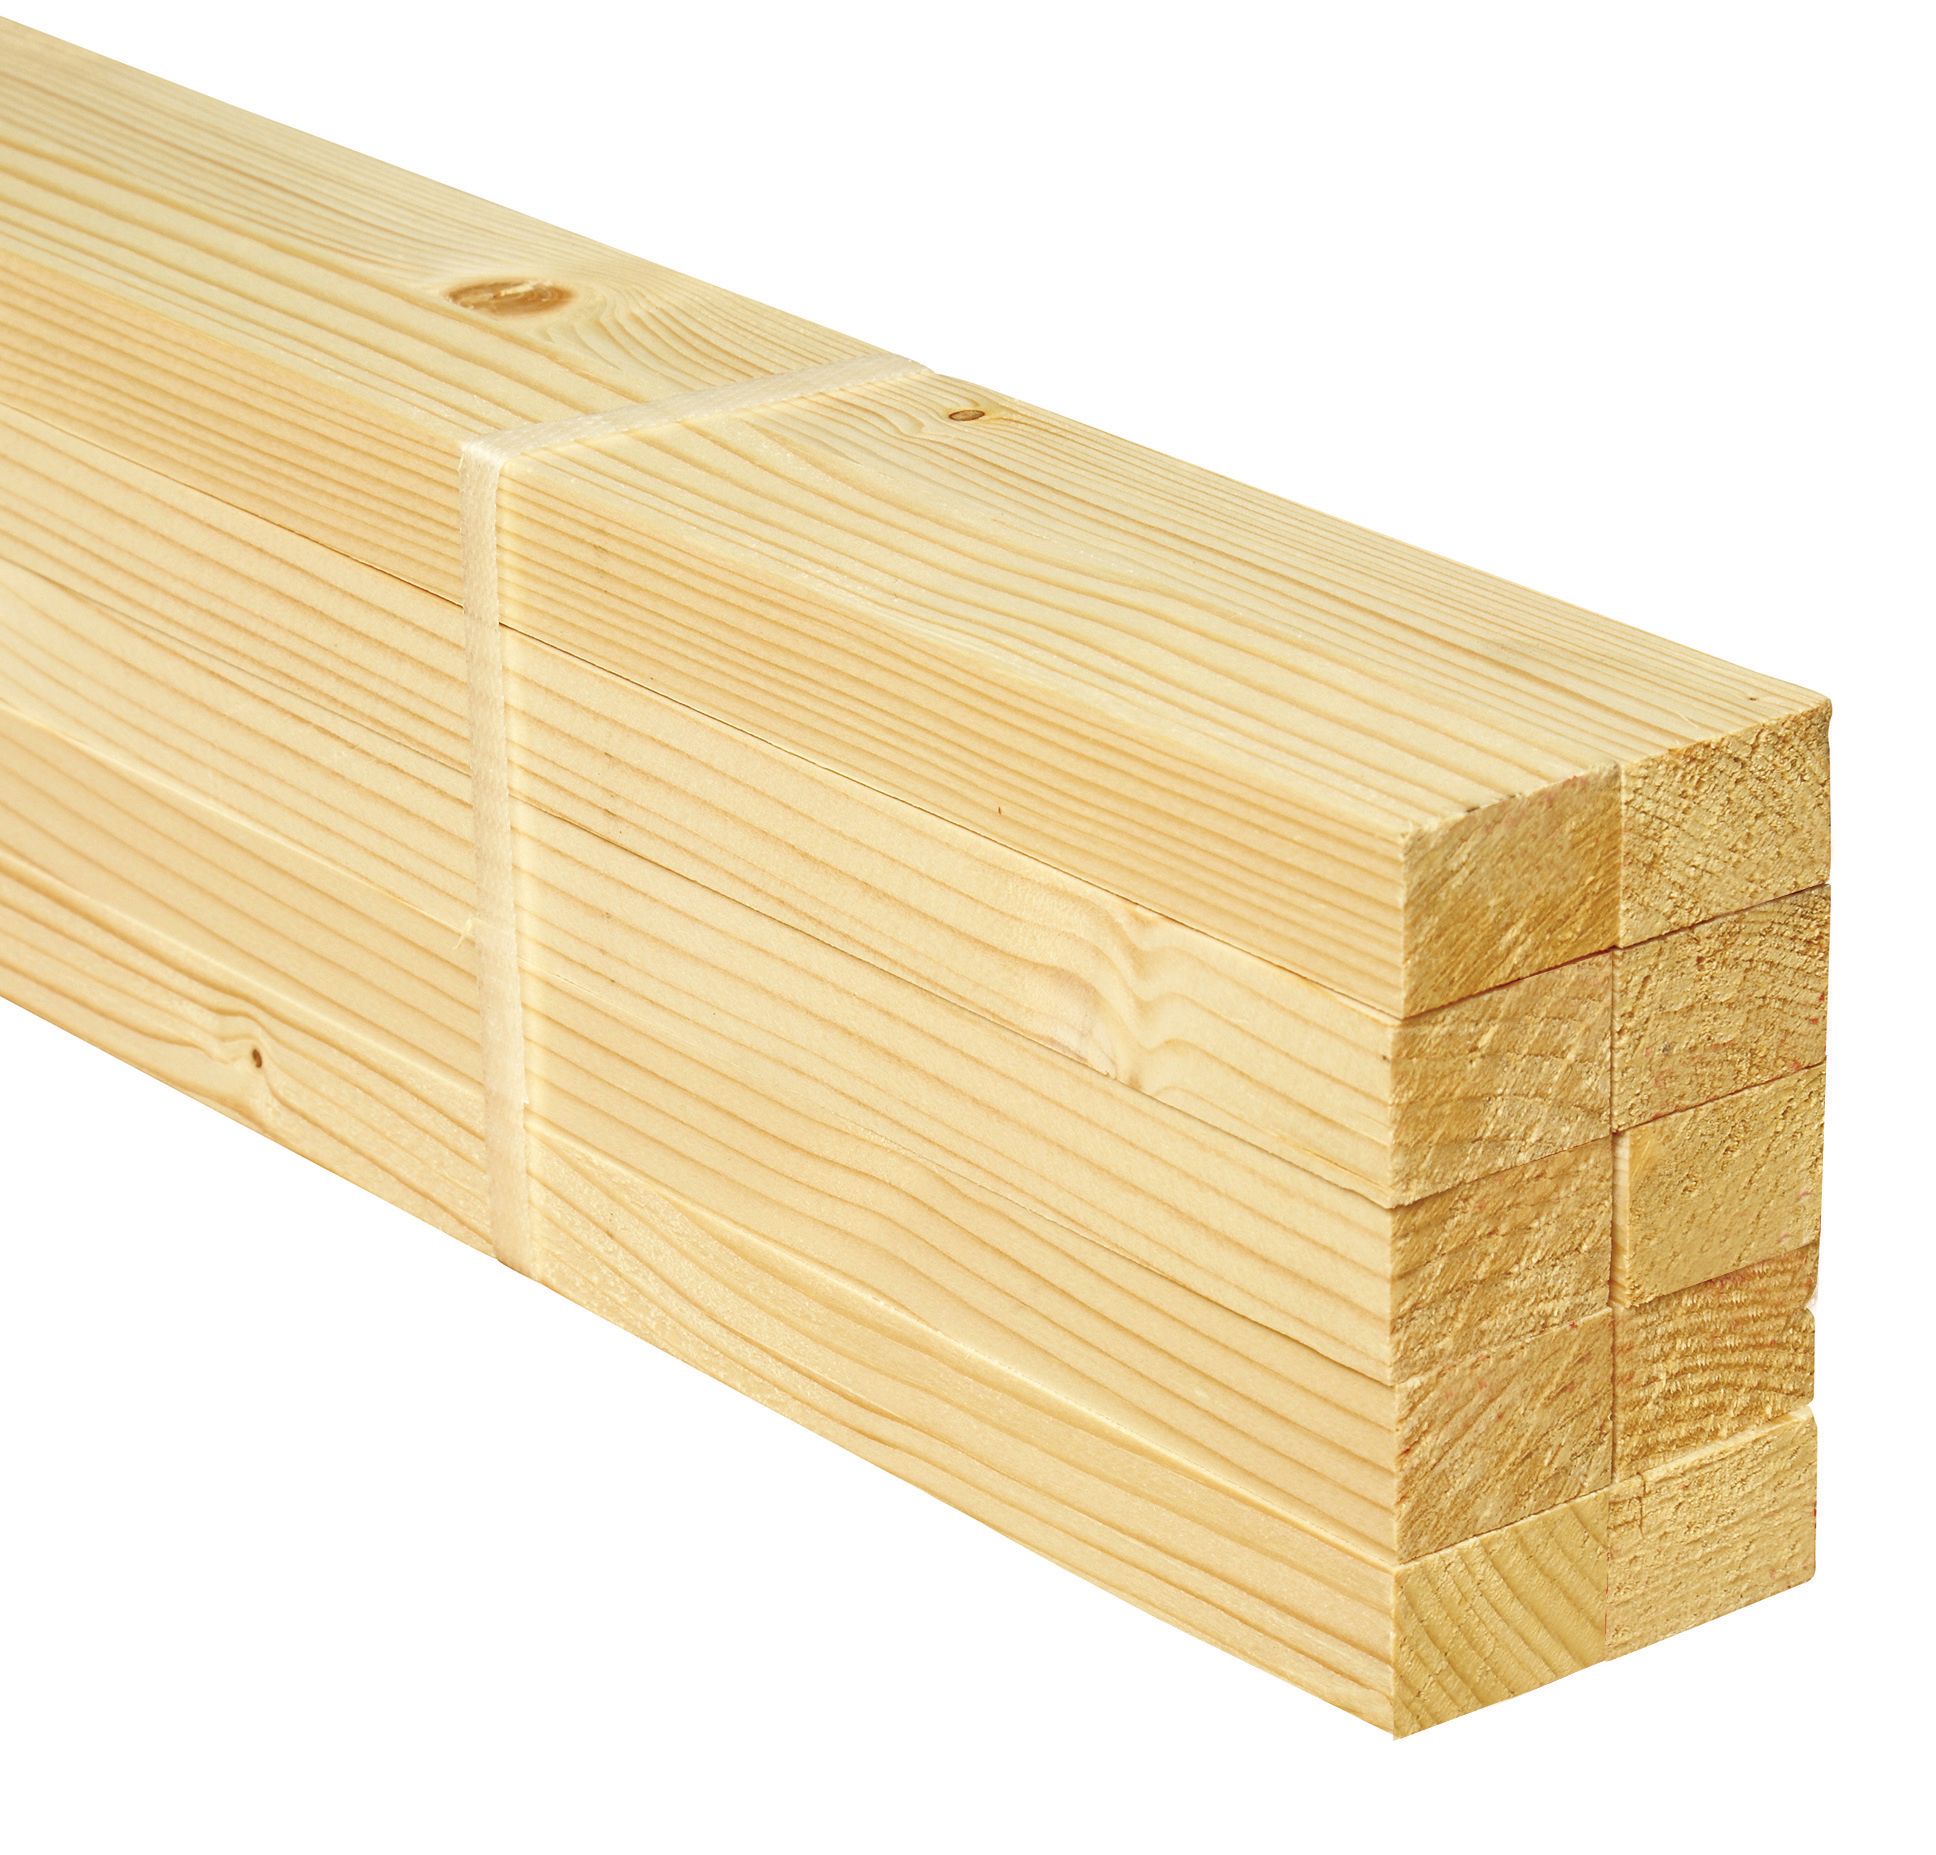 Image of Wickes Whitewood PSE Timber - 18 x 28 x 2400mm - Pack of 10